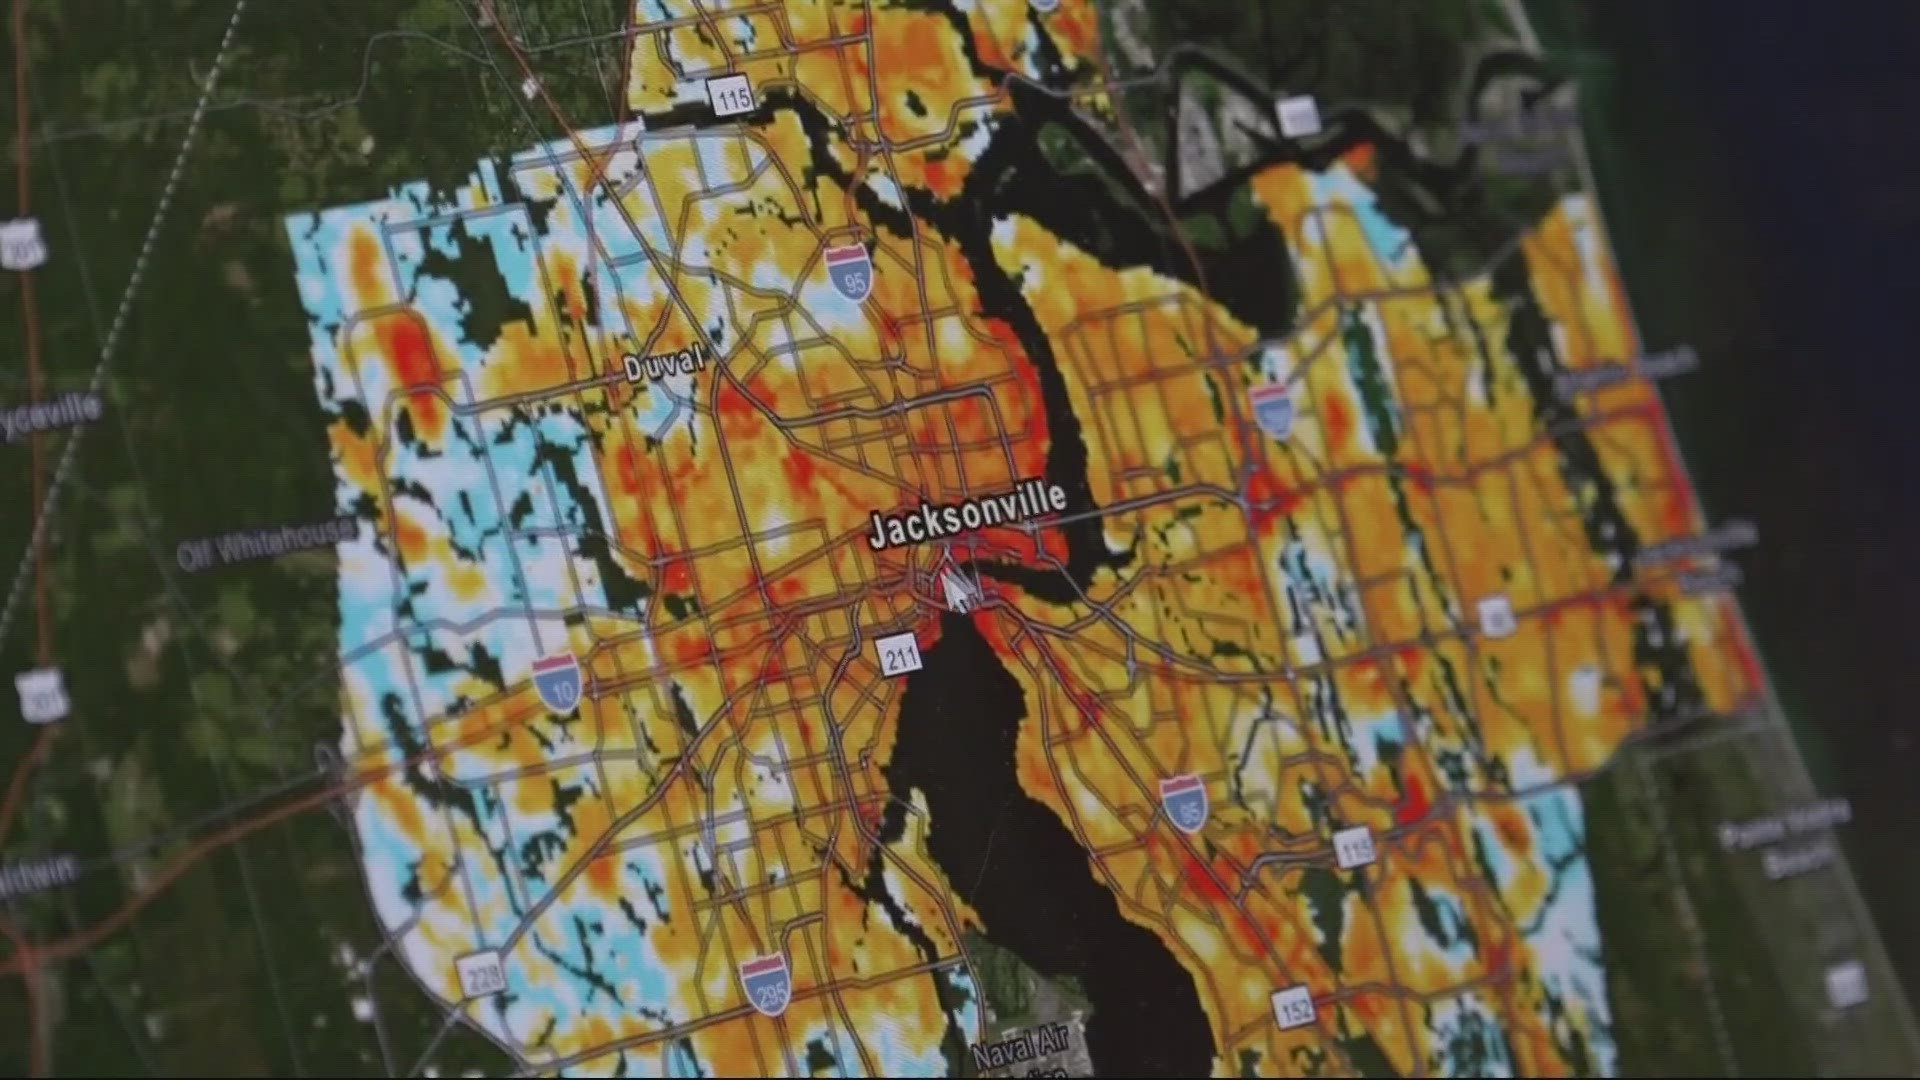 The city of Jacksonville and University of North Florida teamed up for an urban heat study, but what's happening with the findings?